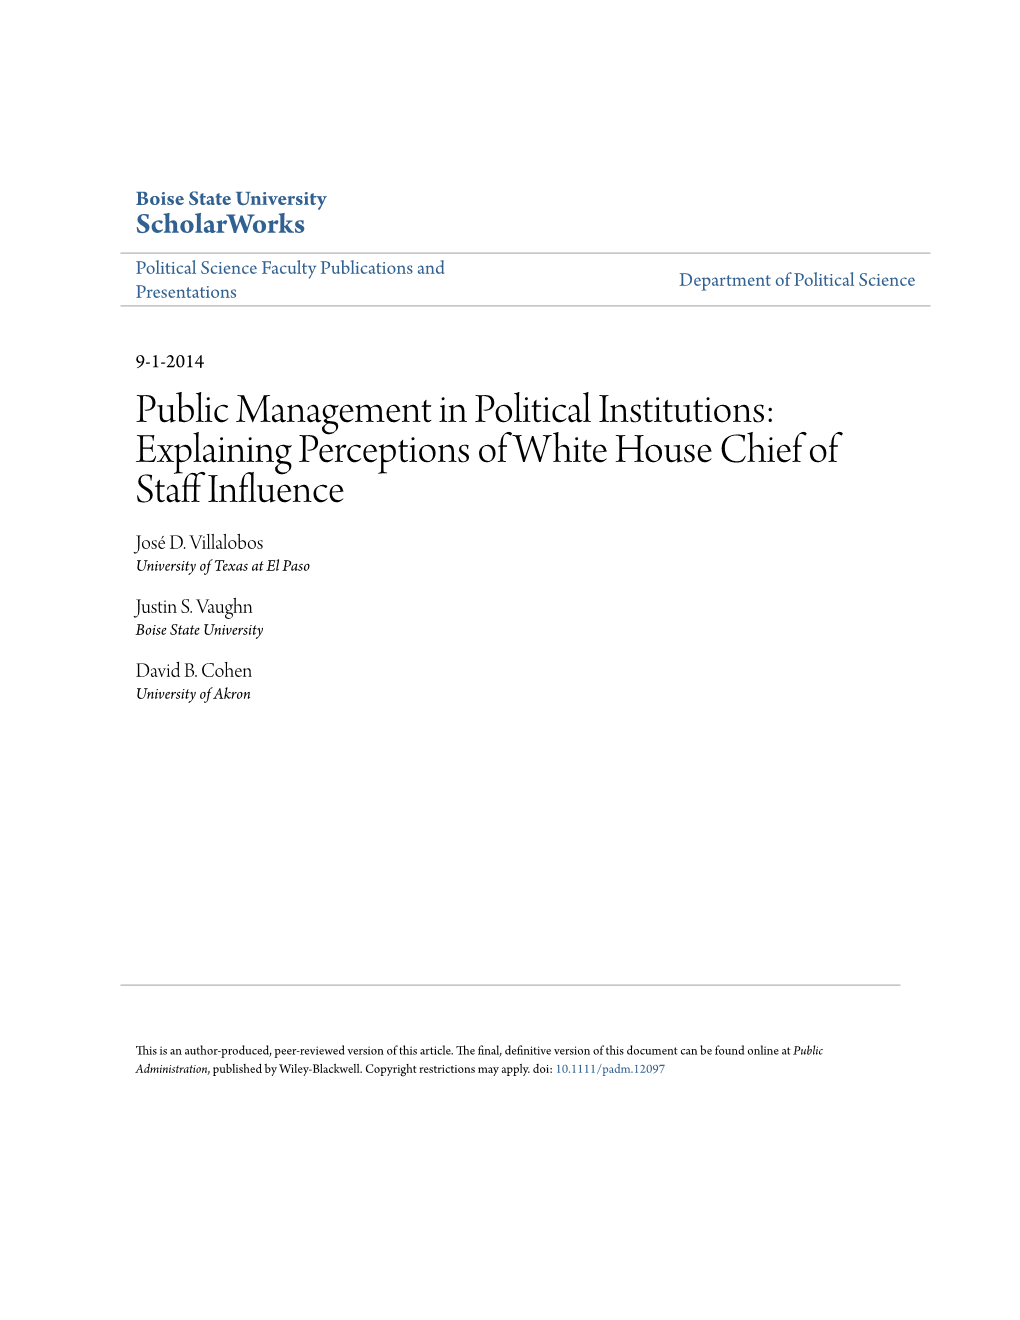 Public Management in Political Institutions: Explaining Perceptions of White House Chief of Staff Nfluei Nce José D